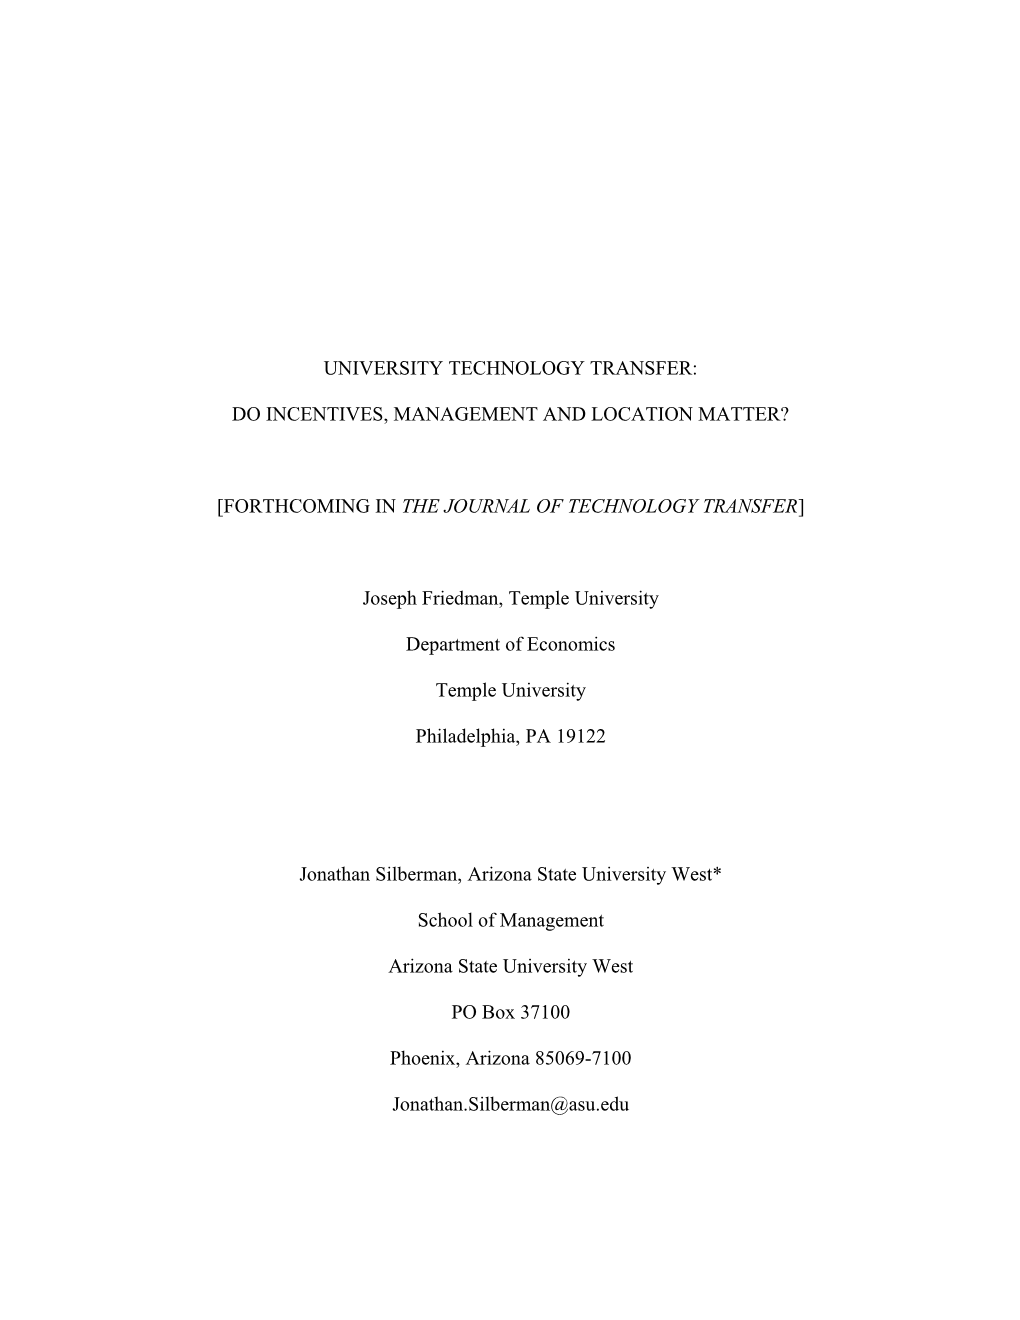 University Technology Transfer: the Impact of Organization and Environment